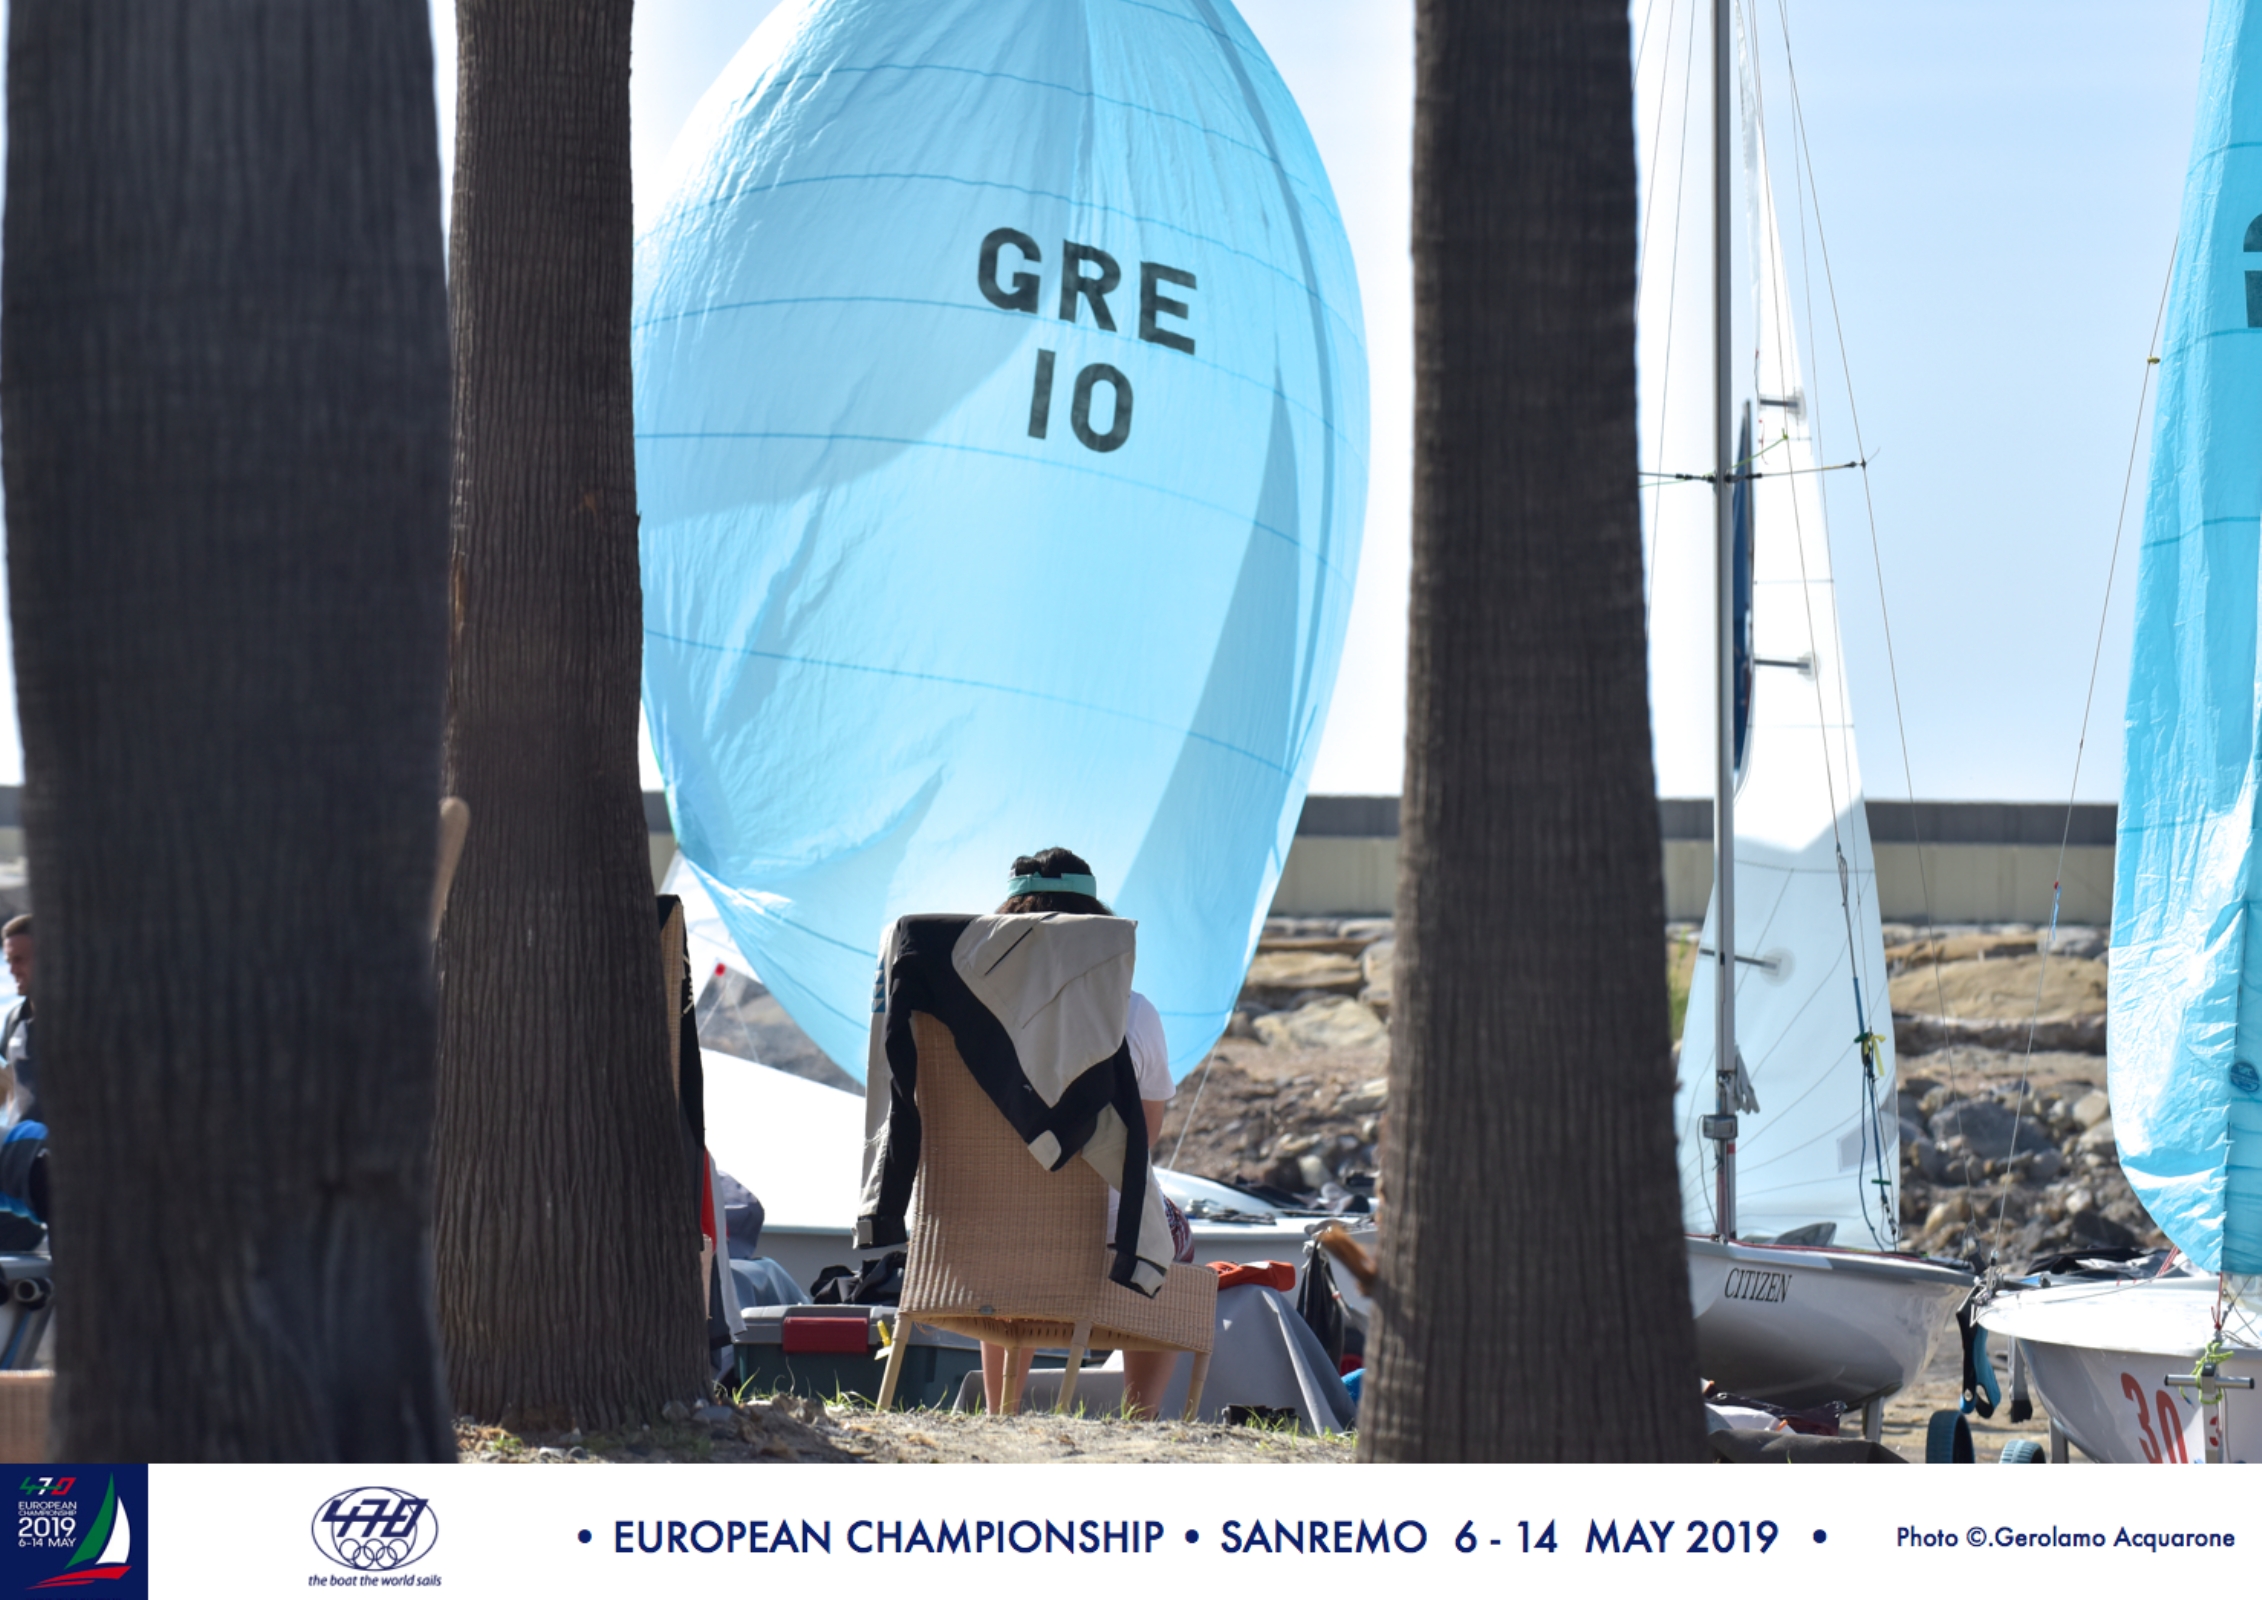  470  European Championship 2019  San Remo ITA  Day 2  no wind for the second day, racing cancelled